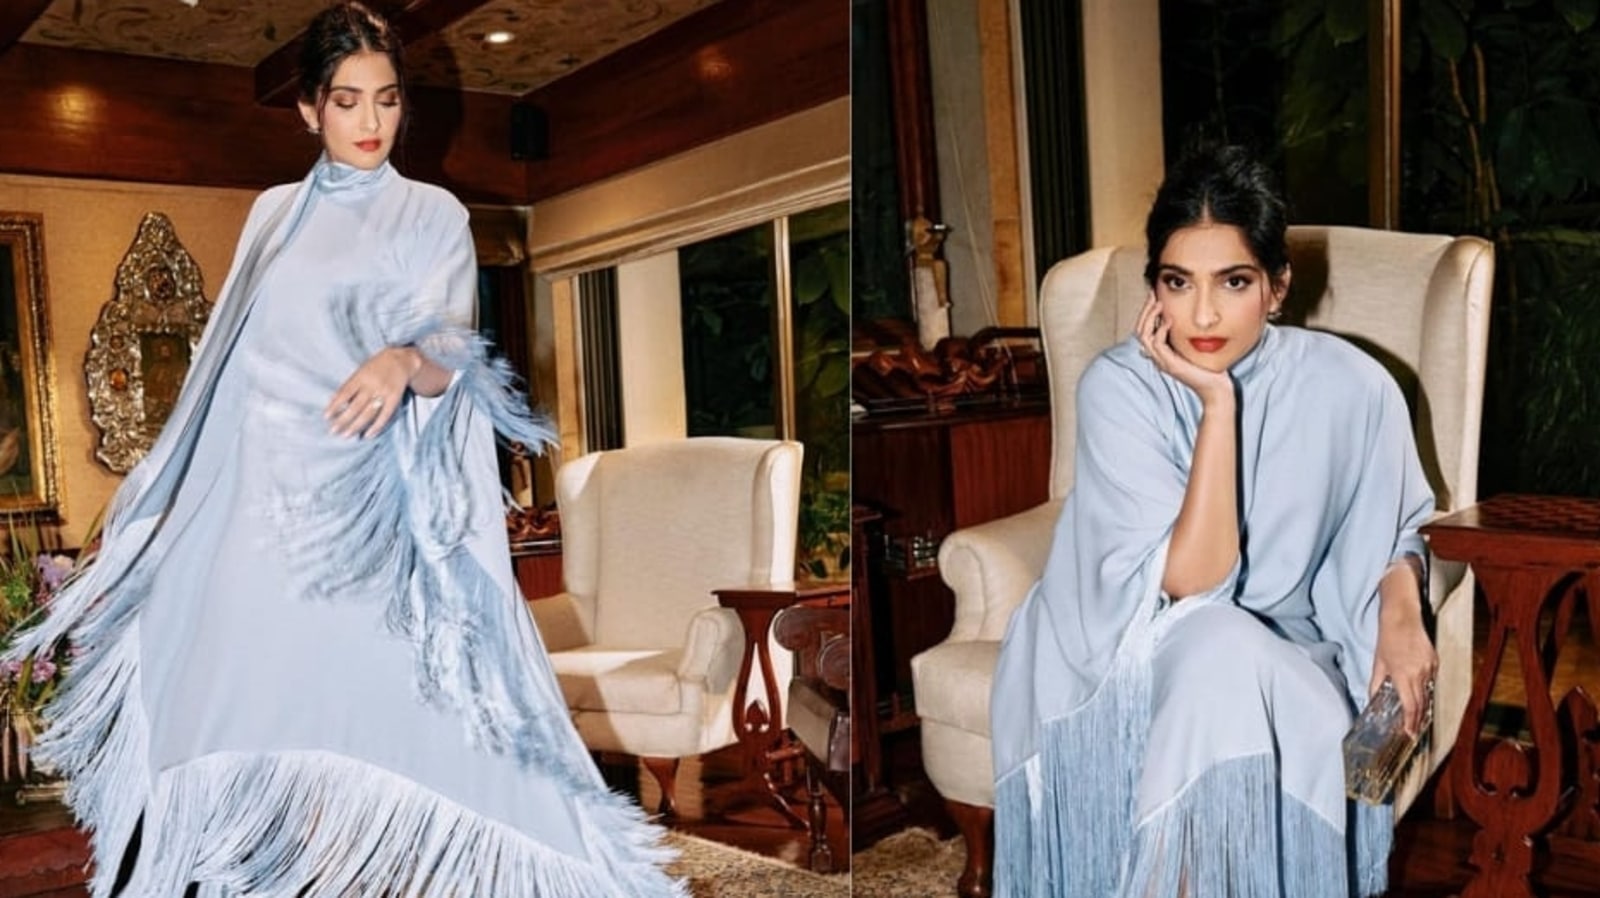 Sonam Kapoor Looks Like Royal Gift Box in Floral Gown